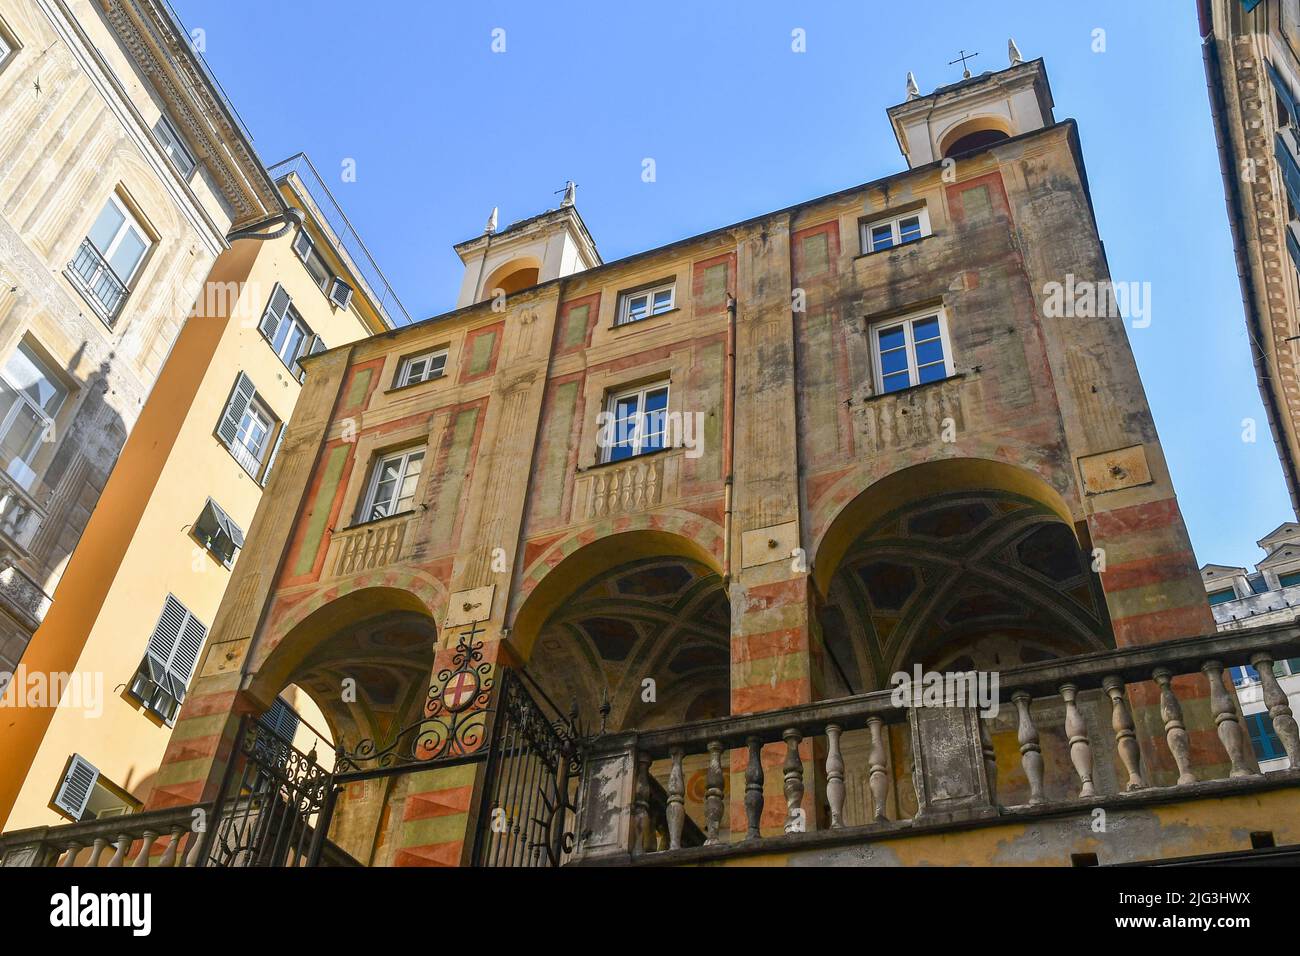 Low-angle view of the Chiesa di San Pietro in Banchi (1585), overlooking Piazza Banchi in the historic centre of Genoa, Liguria, Italy Stock Photo